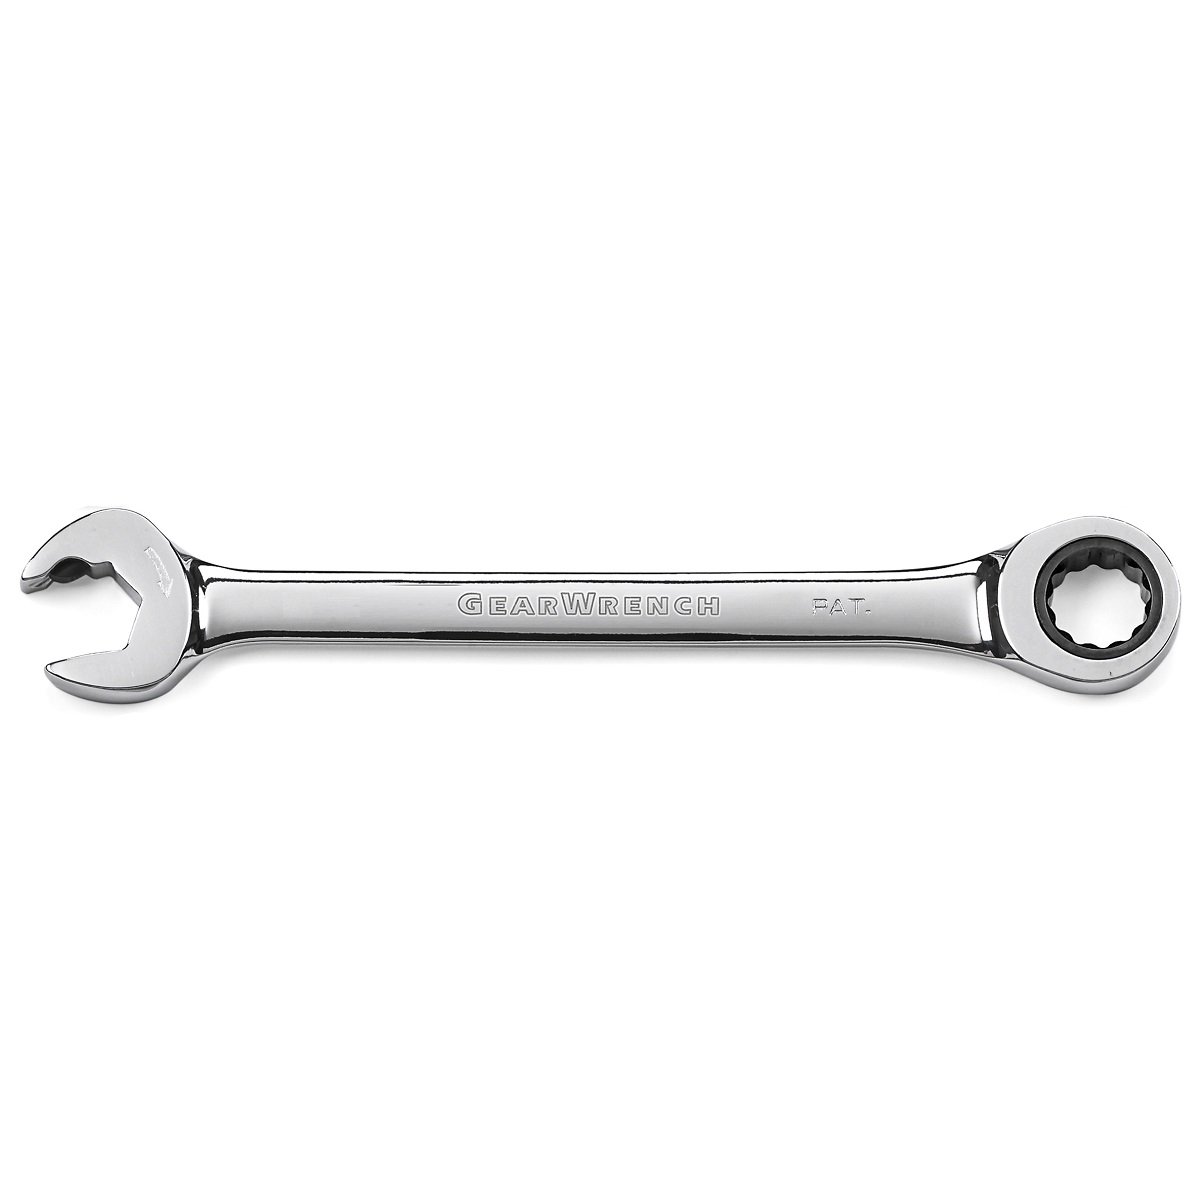 GearWrench Ratcheting Open End Combination Spanner Wrench 11mm 85511